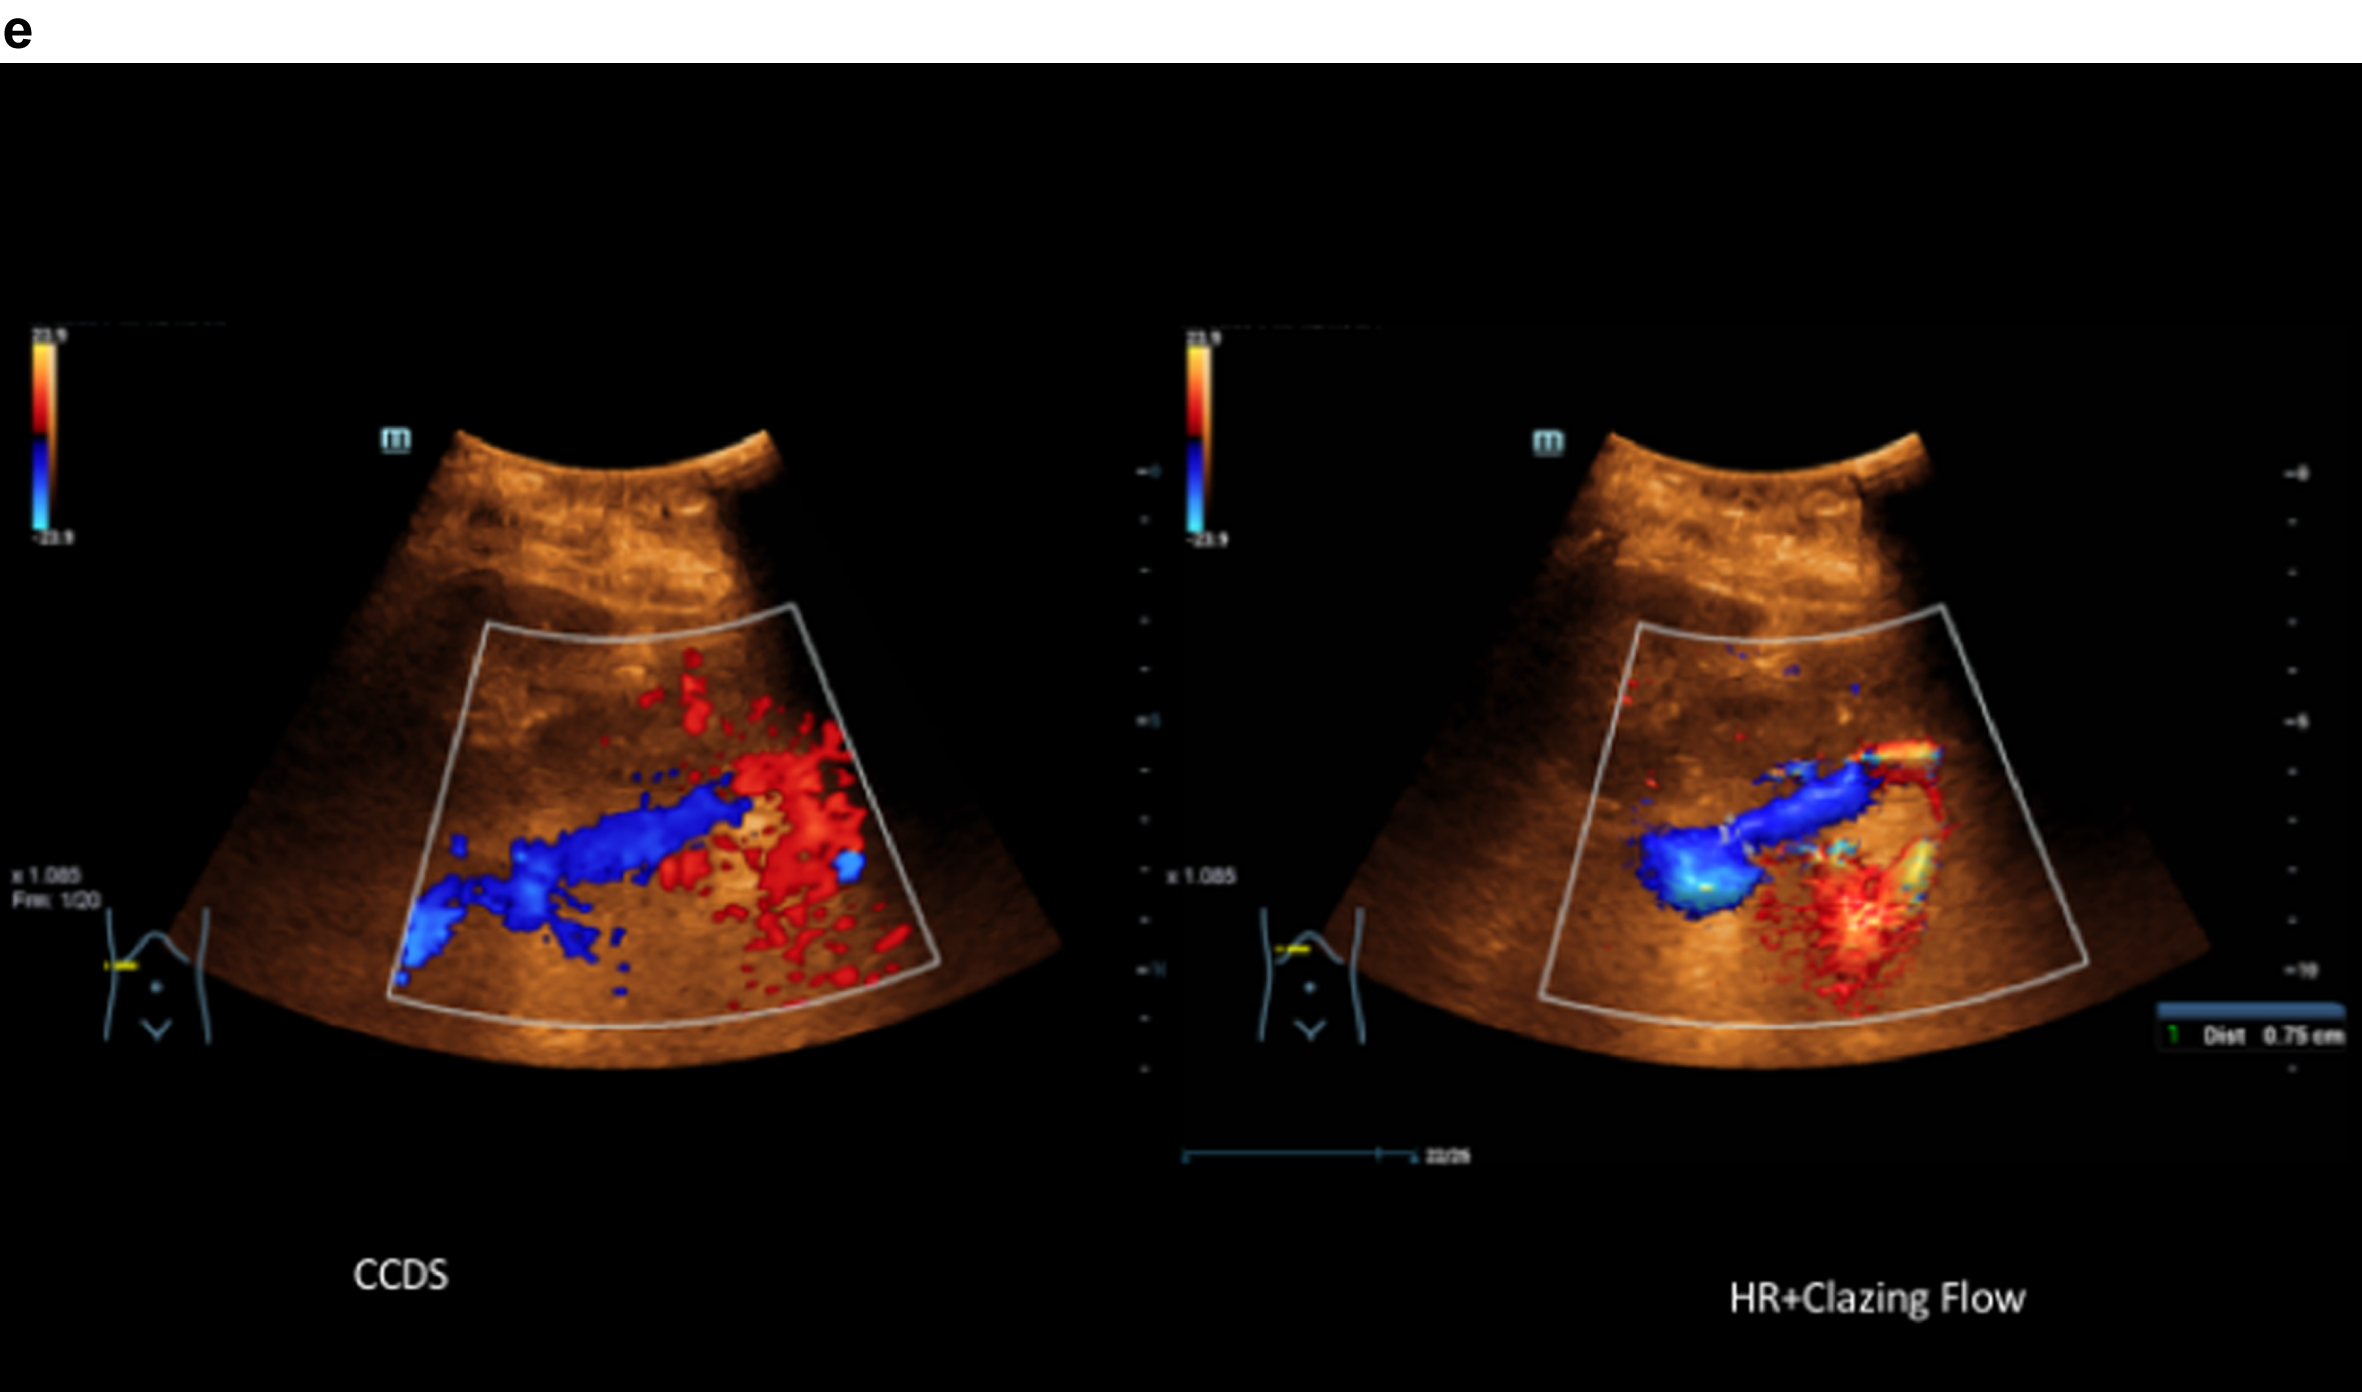 Comparison of CCDS and HR and Glazing Flow with lower flow artefacts by using HR and Glazing Flow in the pronounced venous constriction of the confluence, VMS and portal vein.